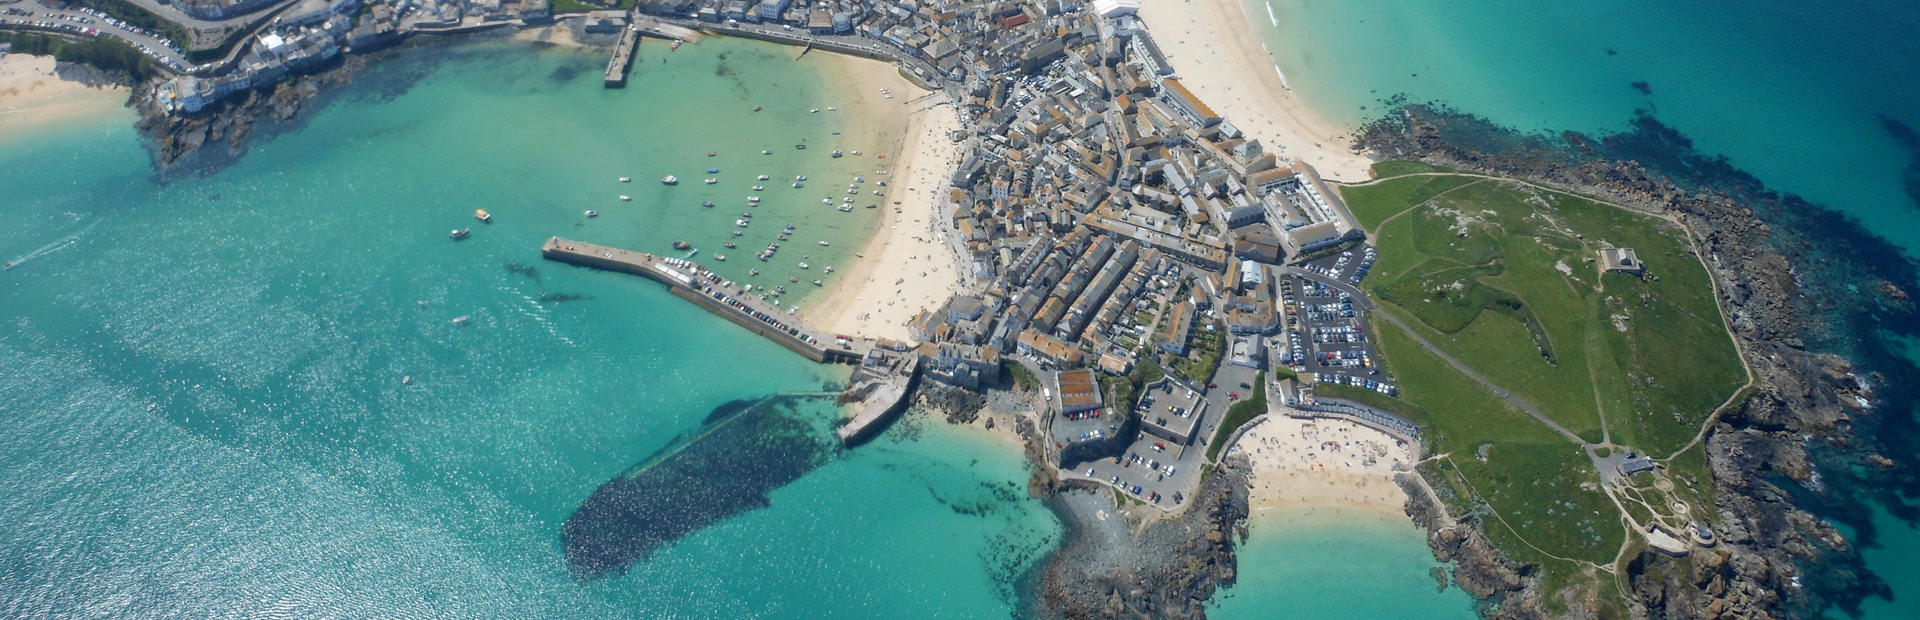 St Ives Bay and Harbour from the air